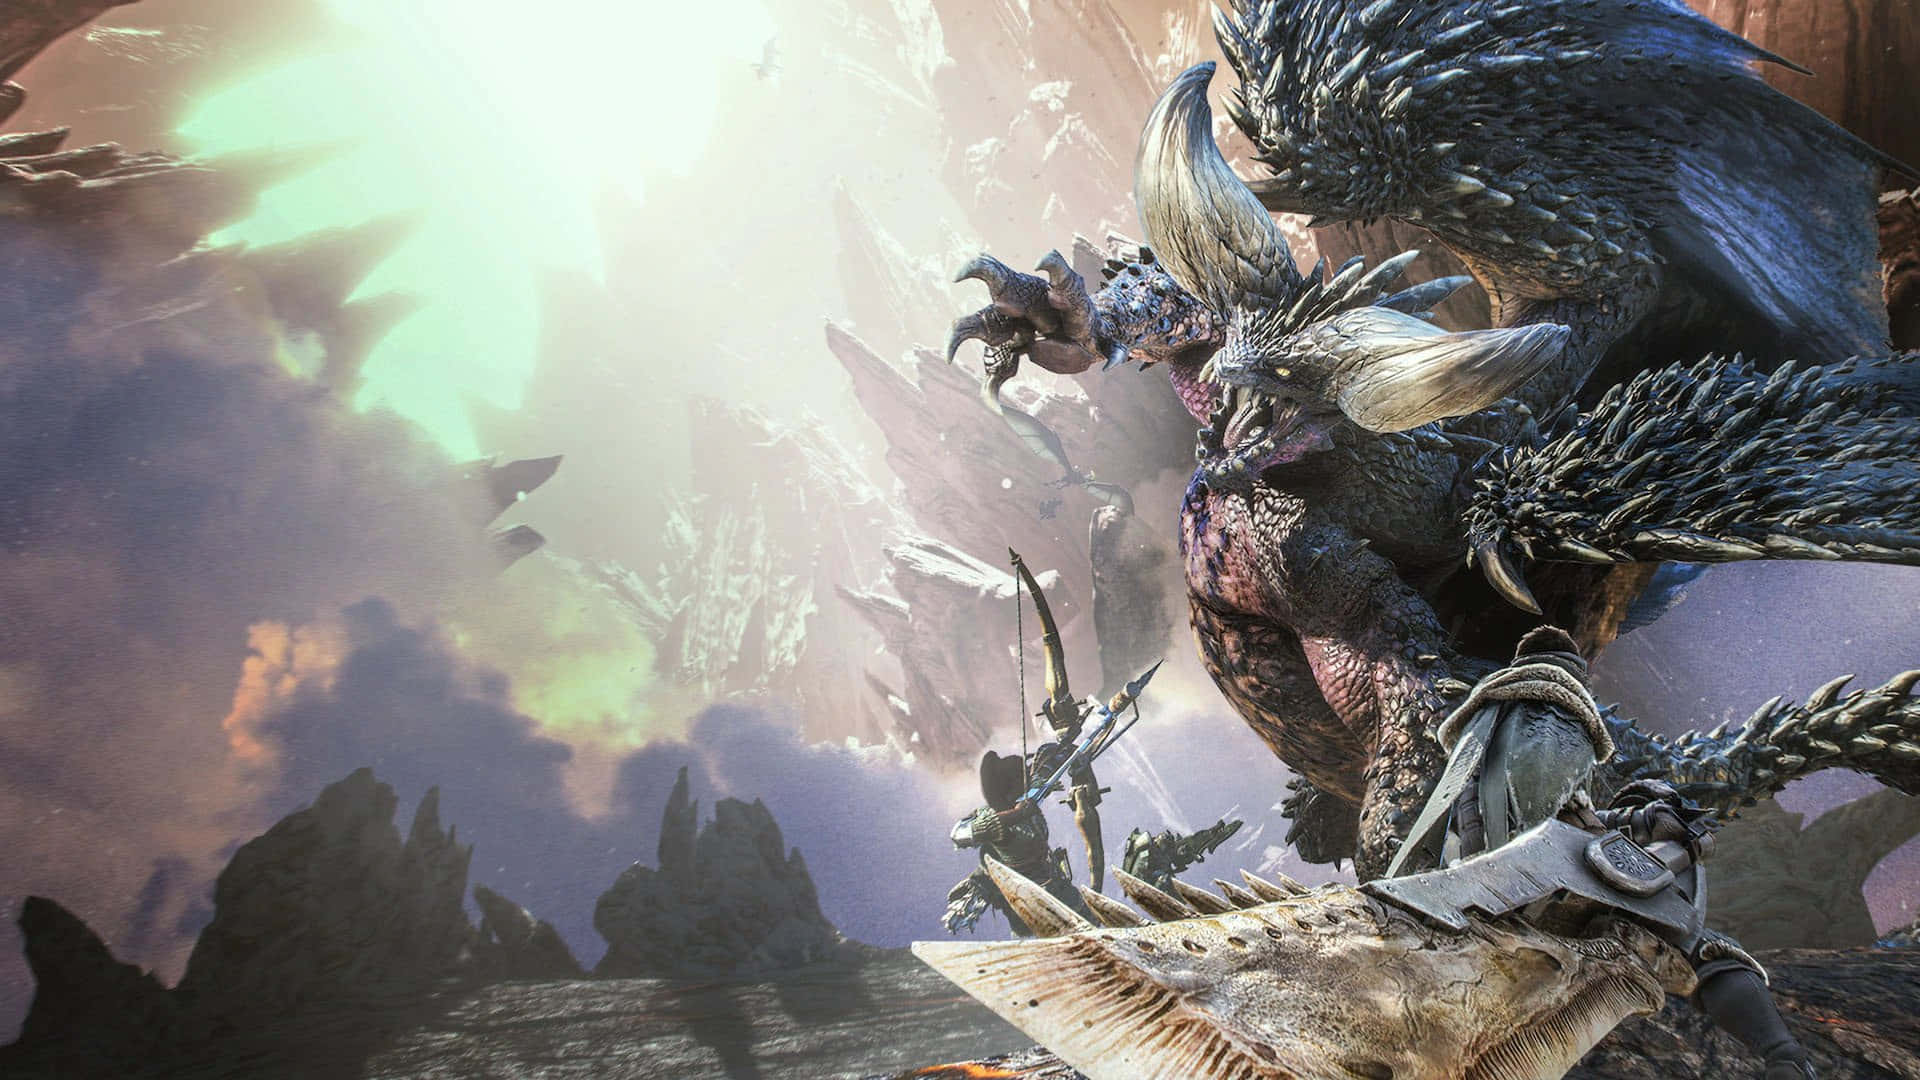 Slay monsters and discover new creatures in Monster Hunter World